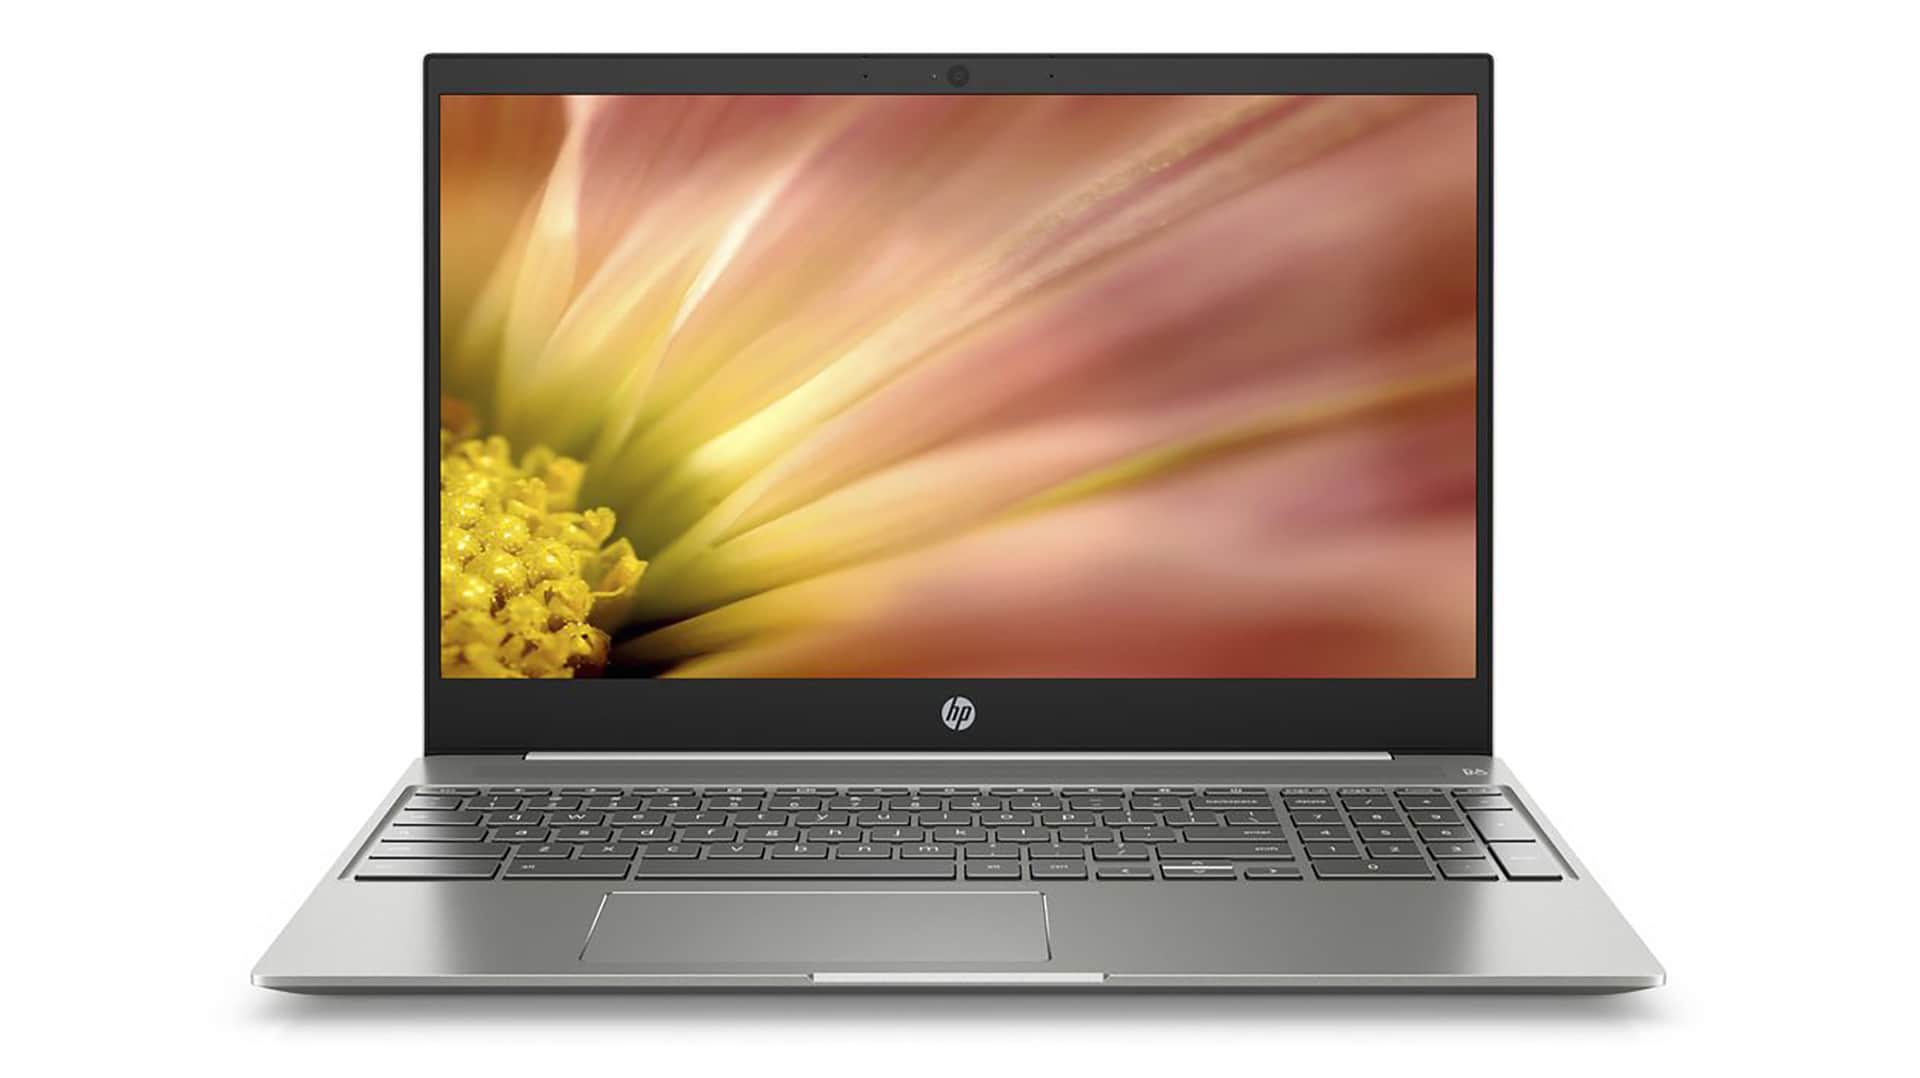 A promotional image of the HP Chromebook 15, HP's first 15-inch Chromebook.